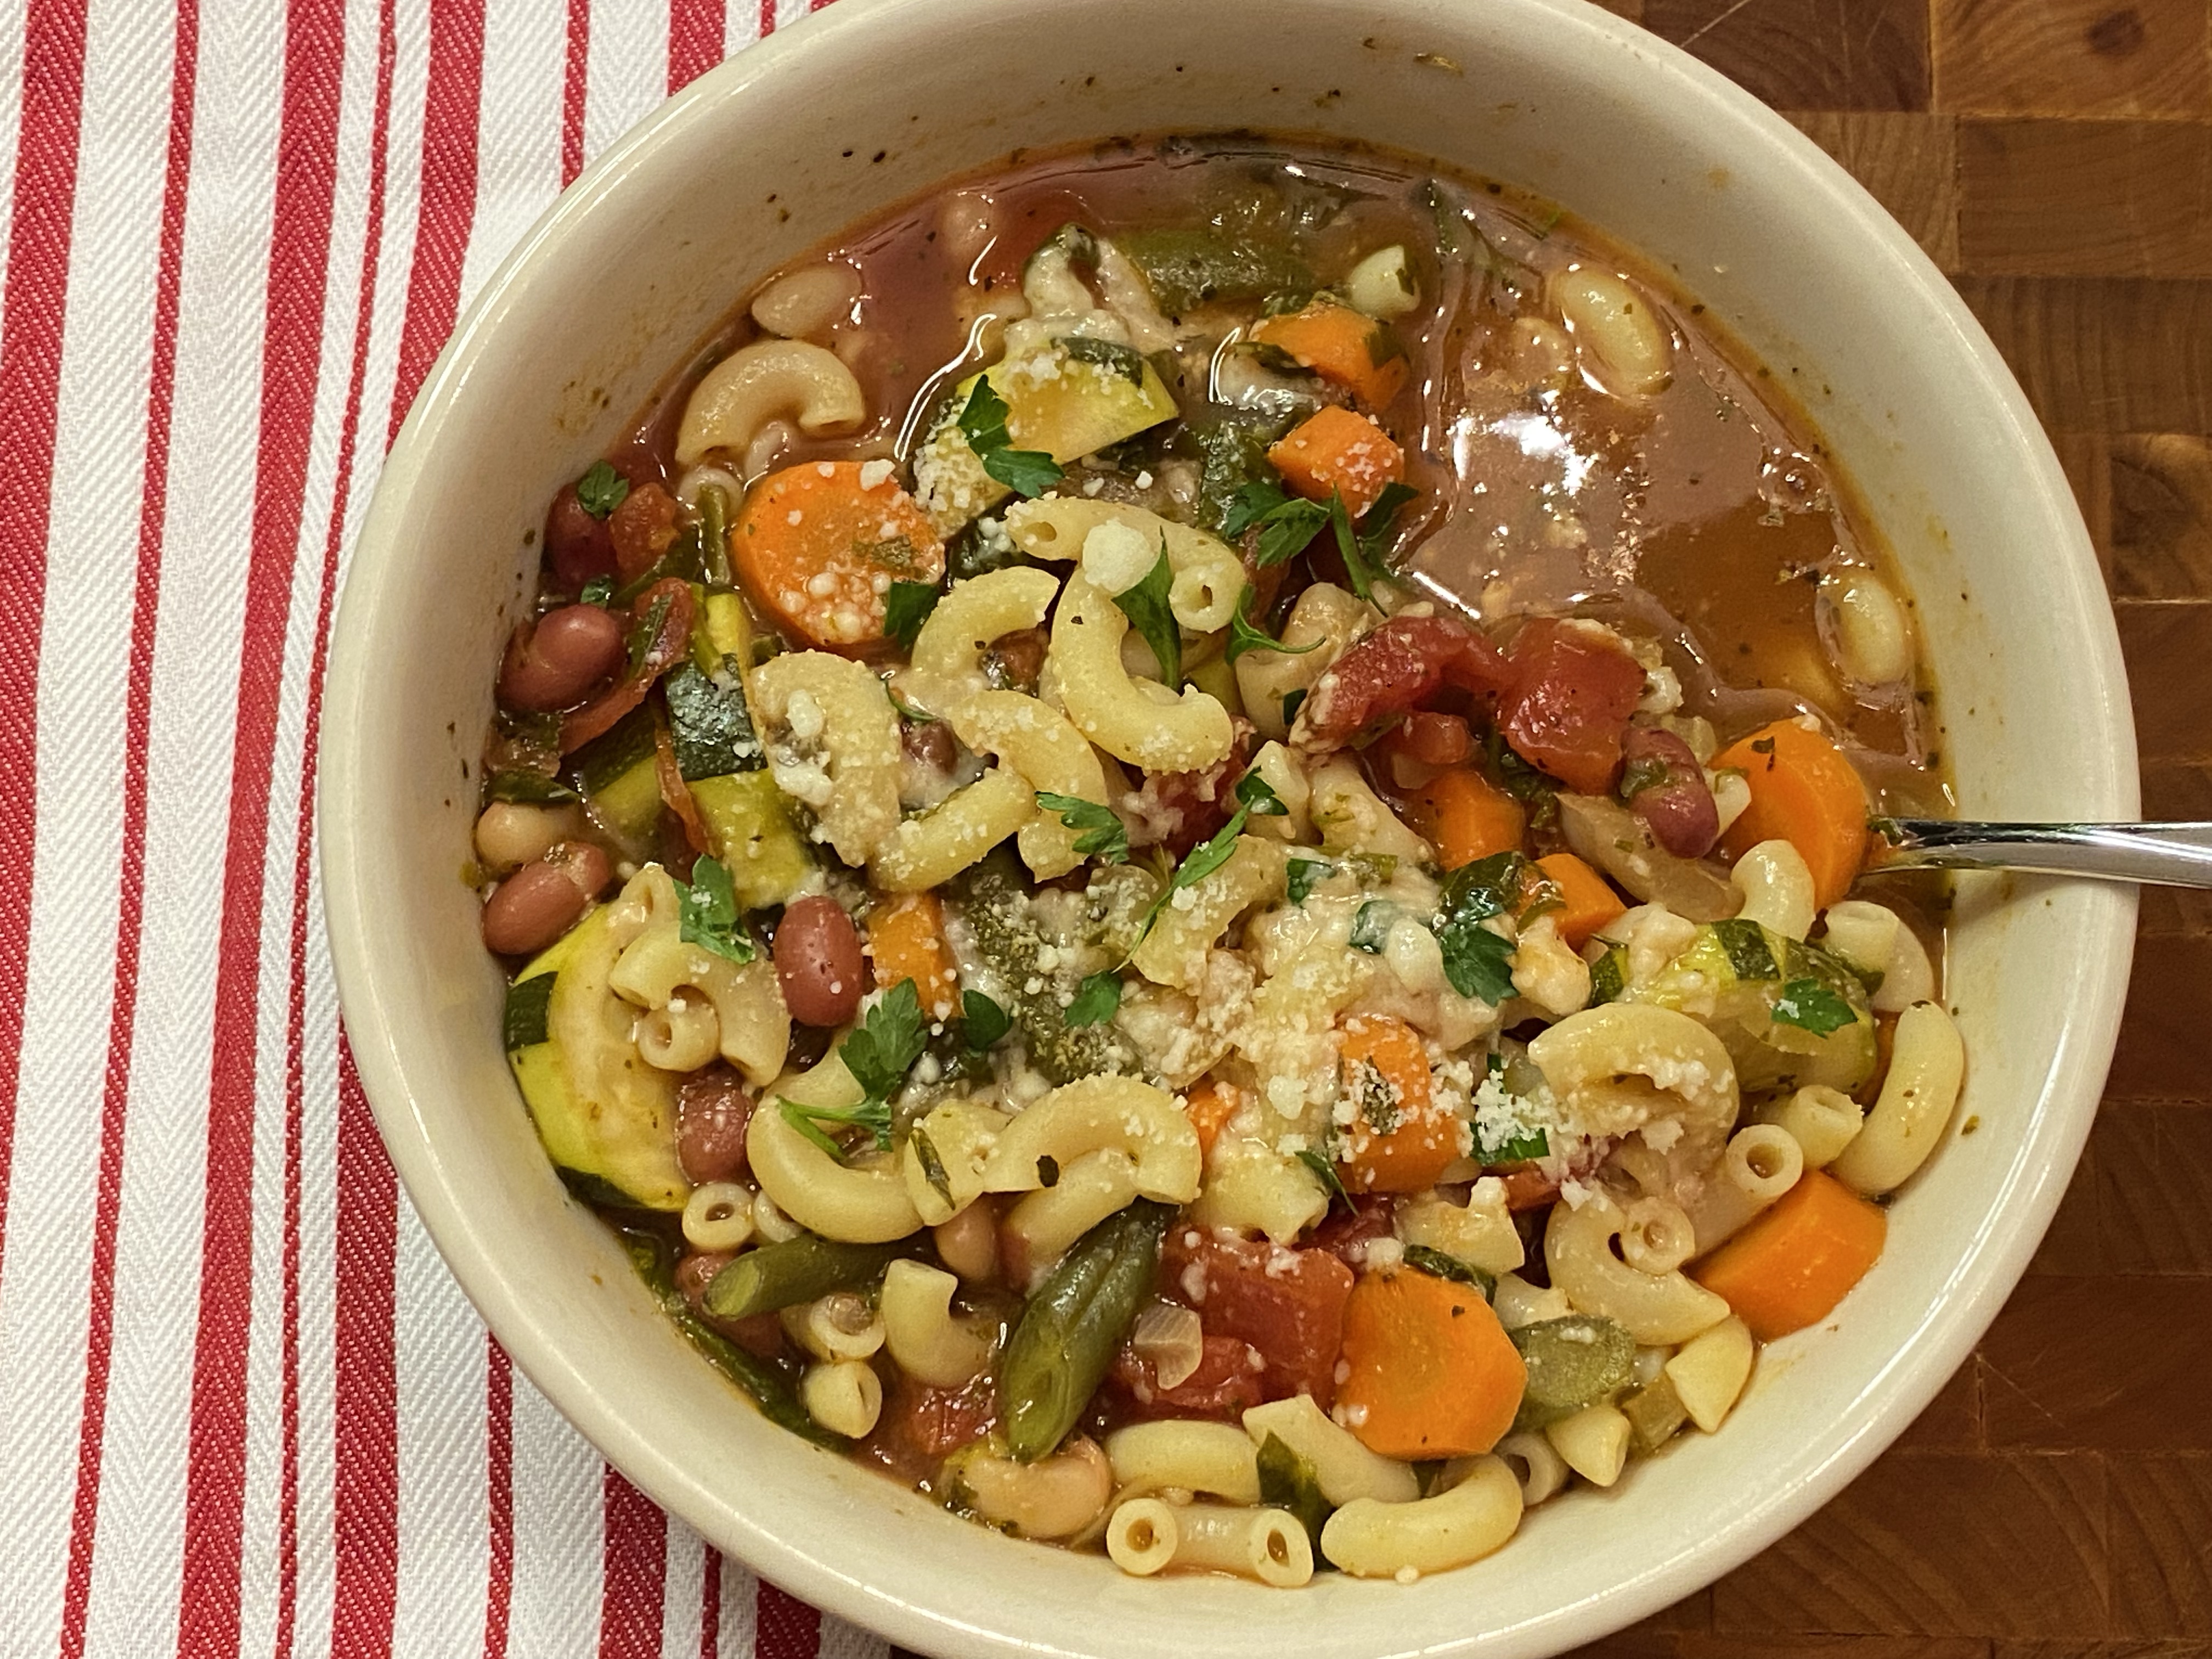 Yummy, hearty Minestrone soup.